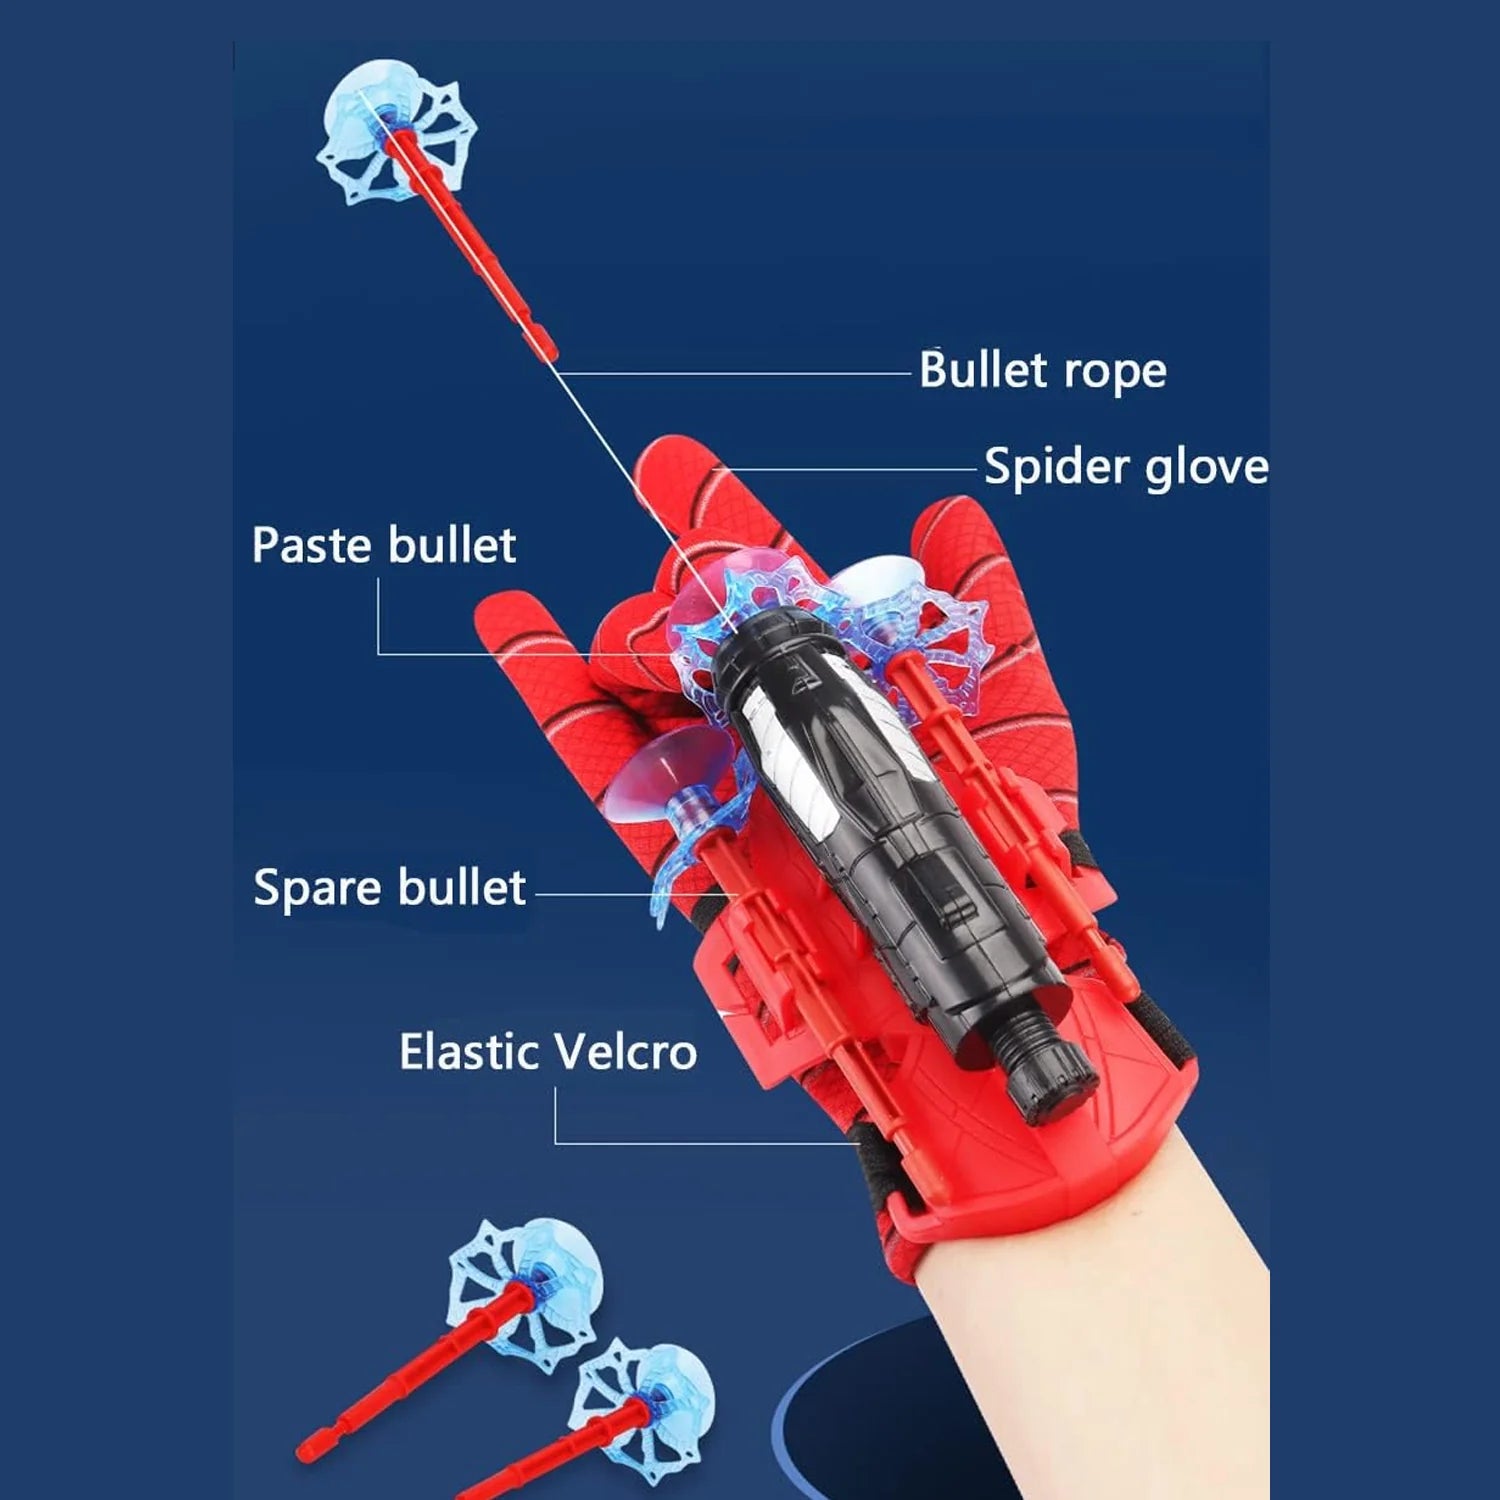 WEB SHOOTER TOY FOR KIDS